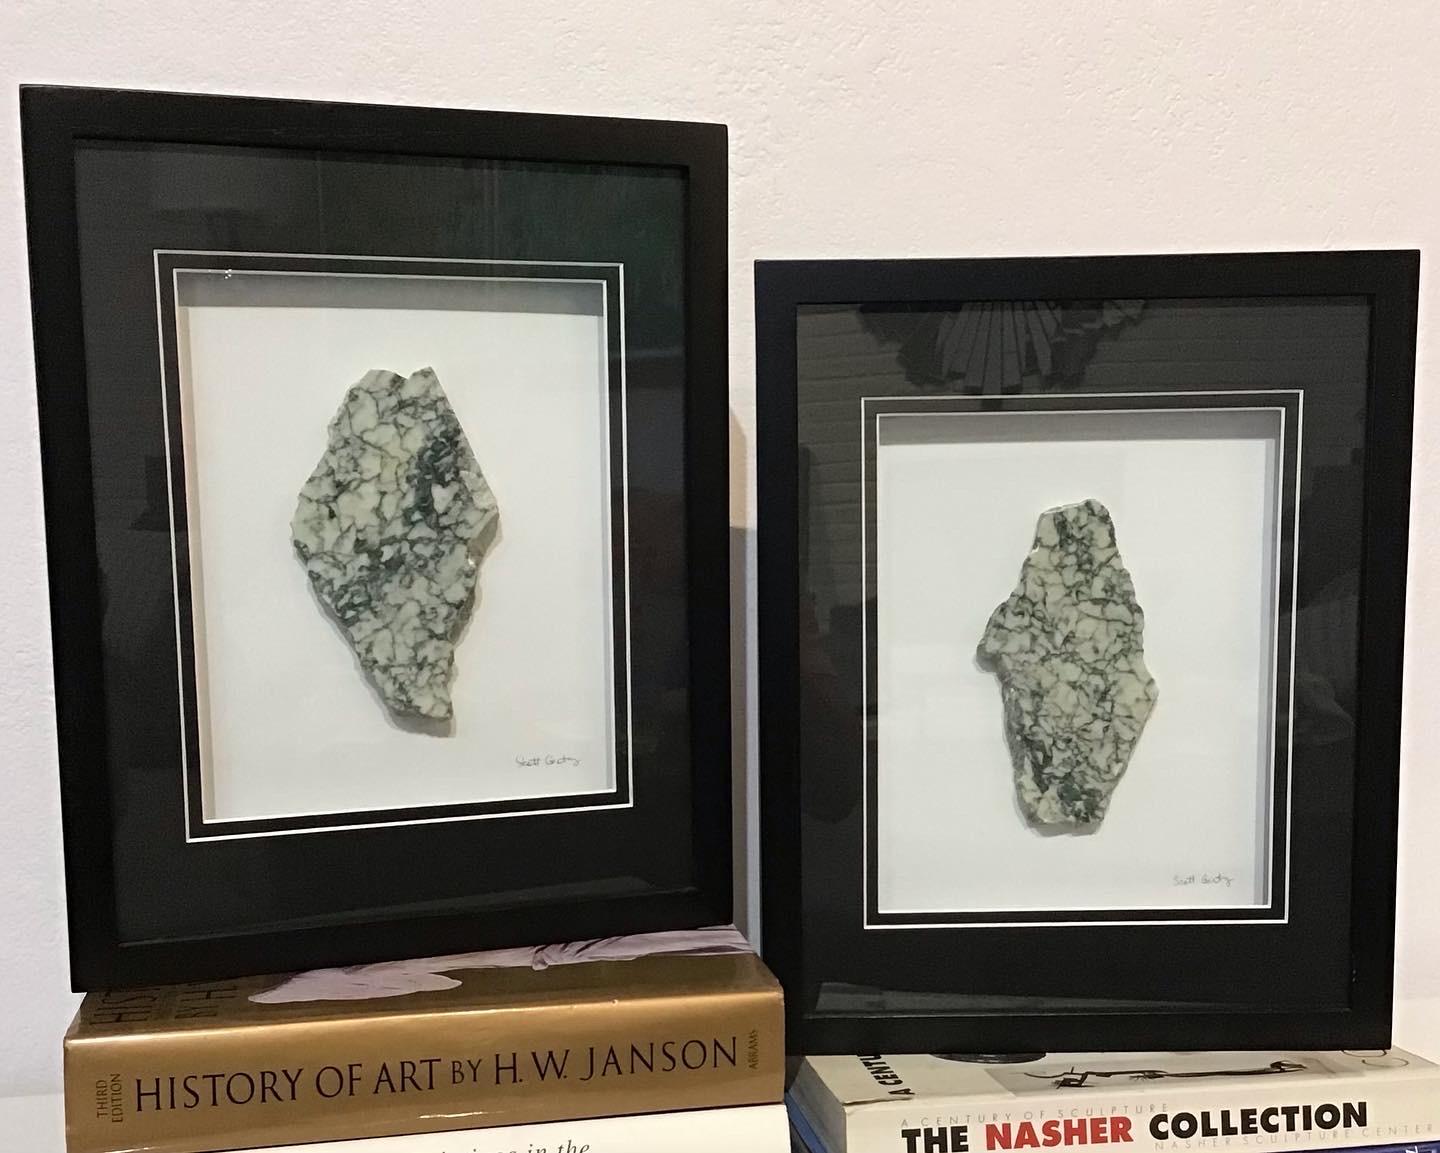 This pair of 11x14 inch (12x15 in framed) Campan Vert Marble works of art have been created by Scott Gentry using real stones from his sculpture creation process. Each stone is lovingly and painstakingly hand-polished to accentuate its natural